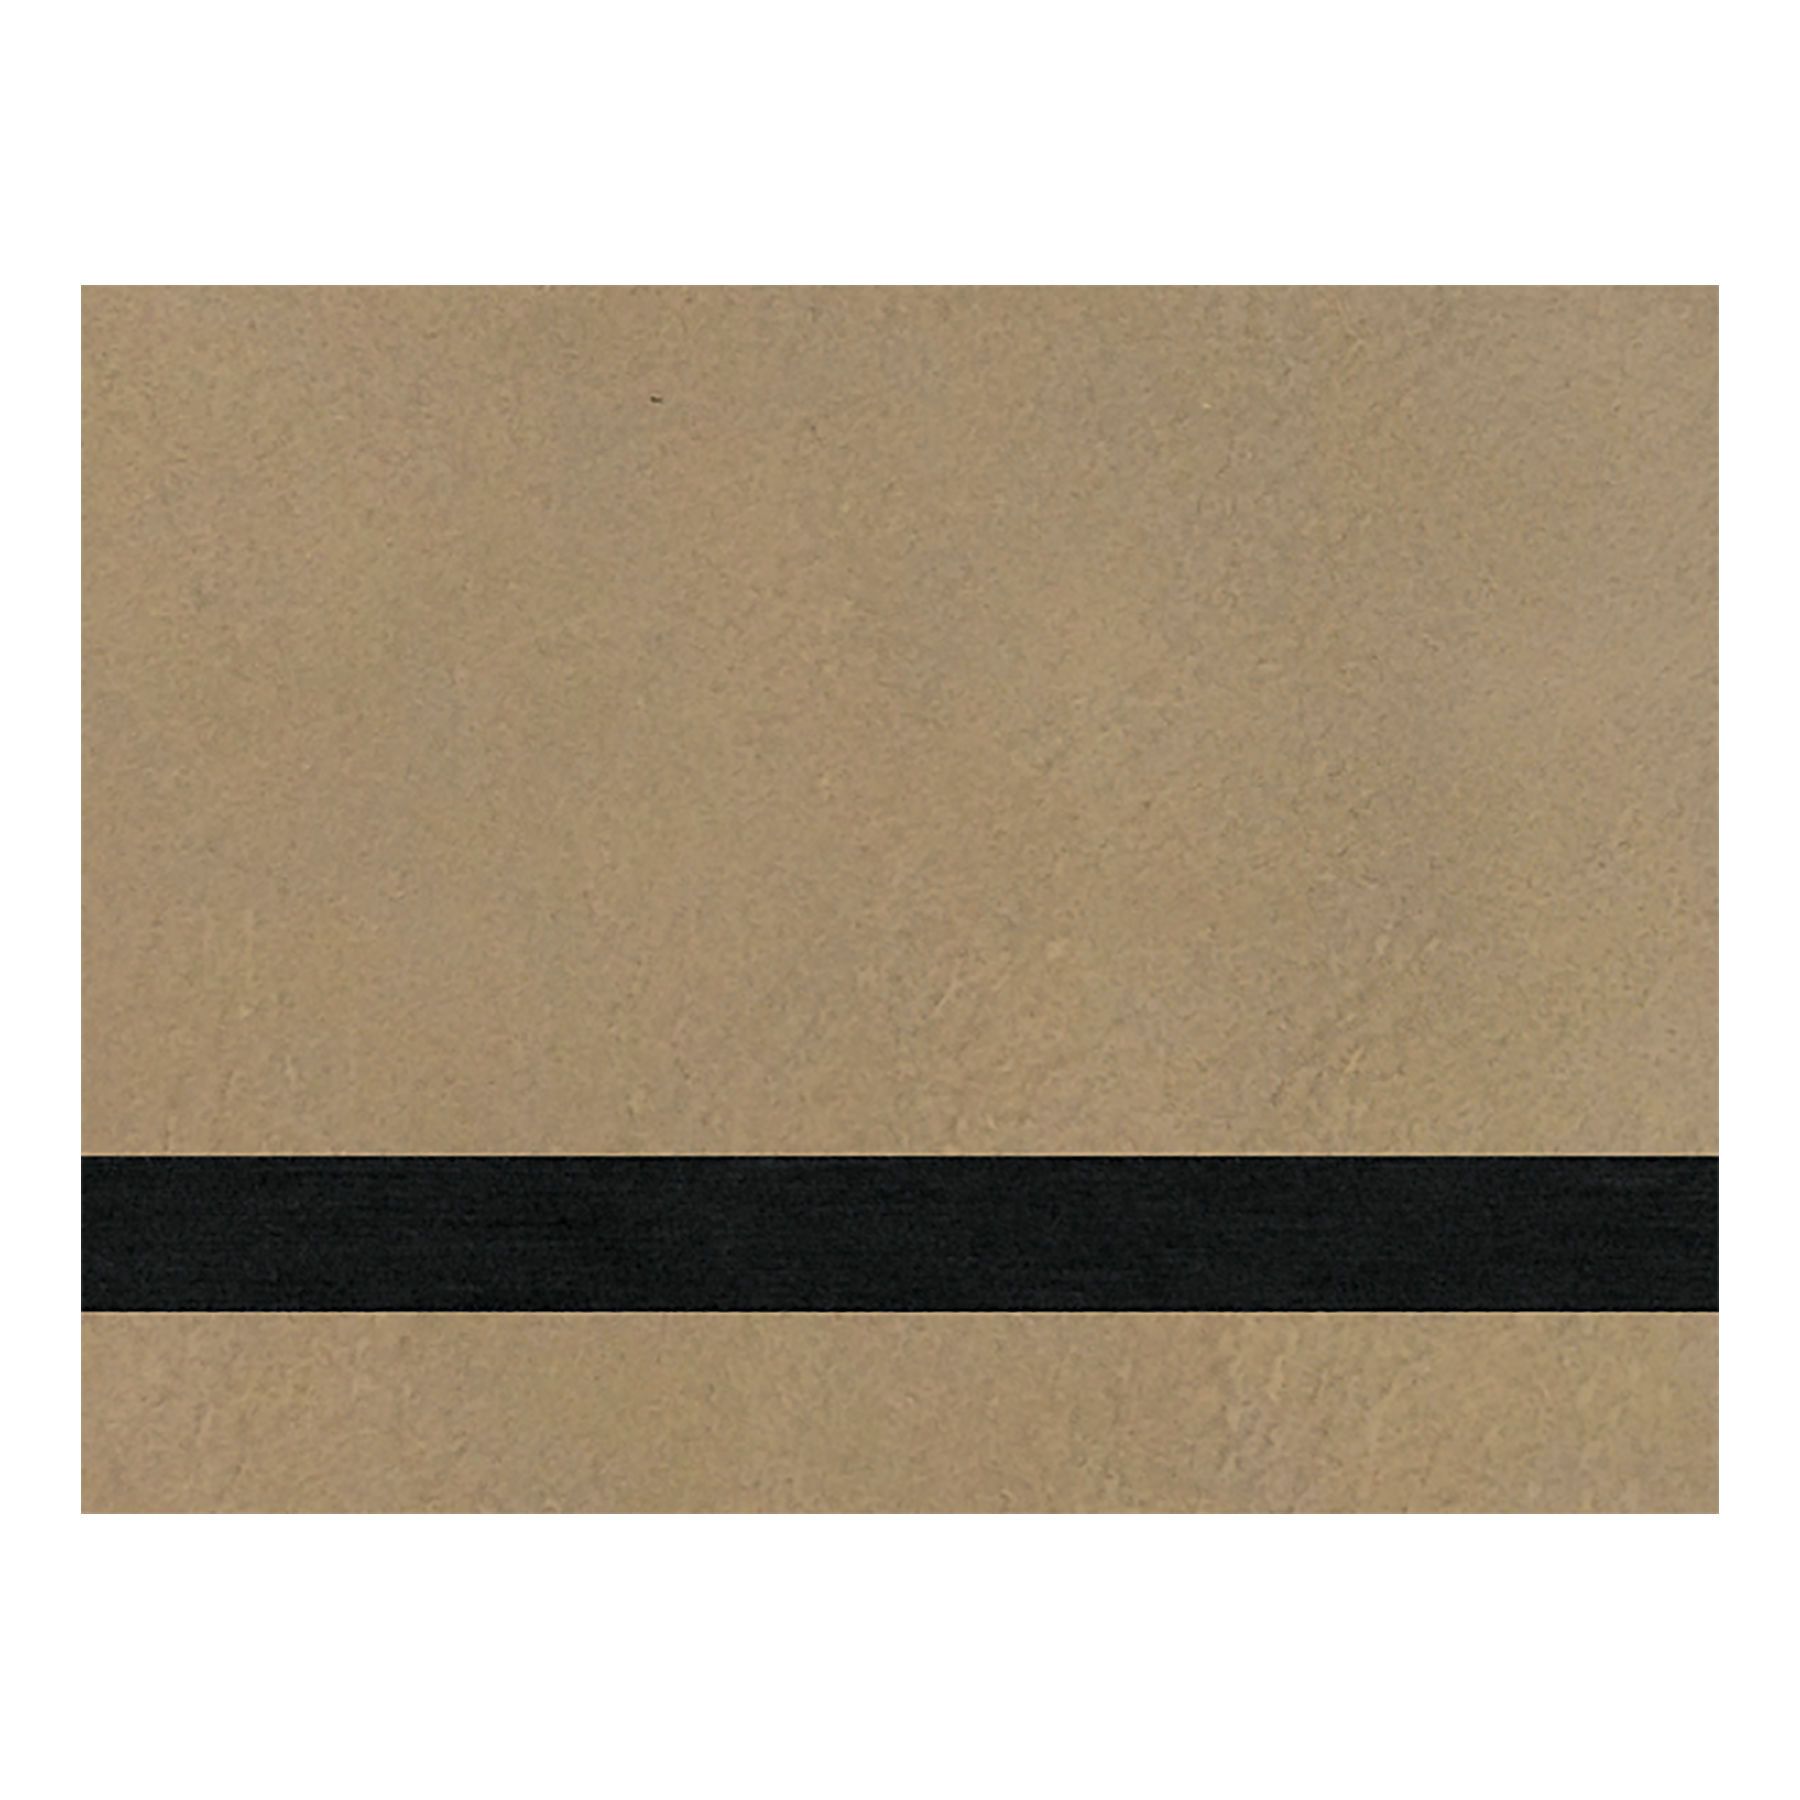 PRE-ORDER! Full Size Laserable Leatherette Sheet Stock, Rayjet Laser Engravers (Available Jan. 2022) Engraving Supplies Craftworks NW R400 (40" x 24") Light Brown/Black 